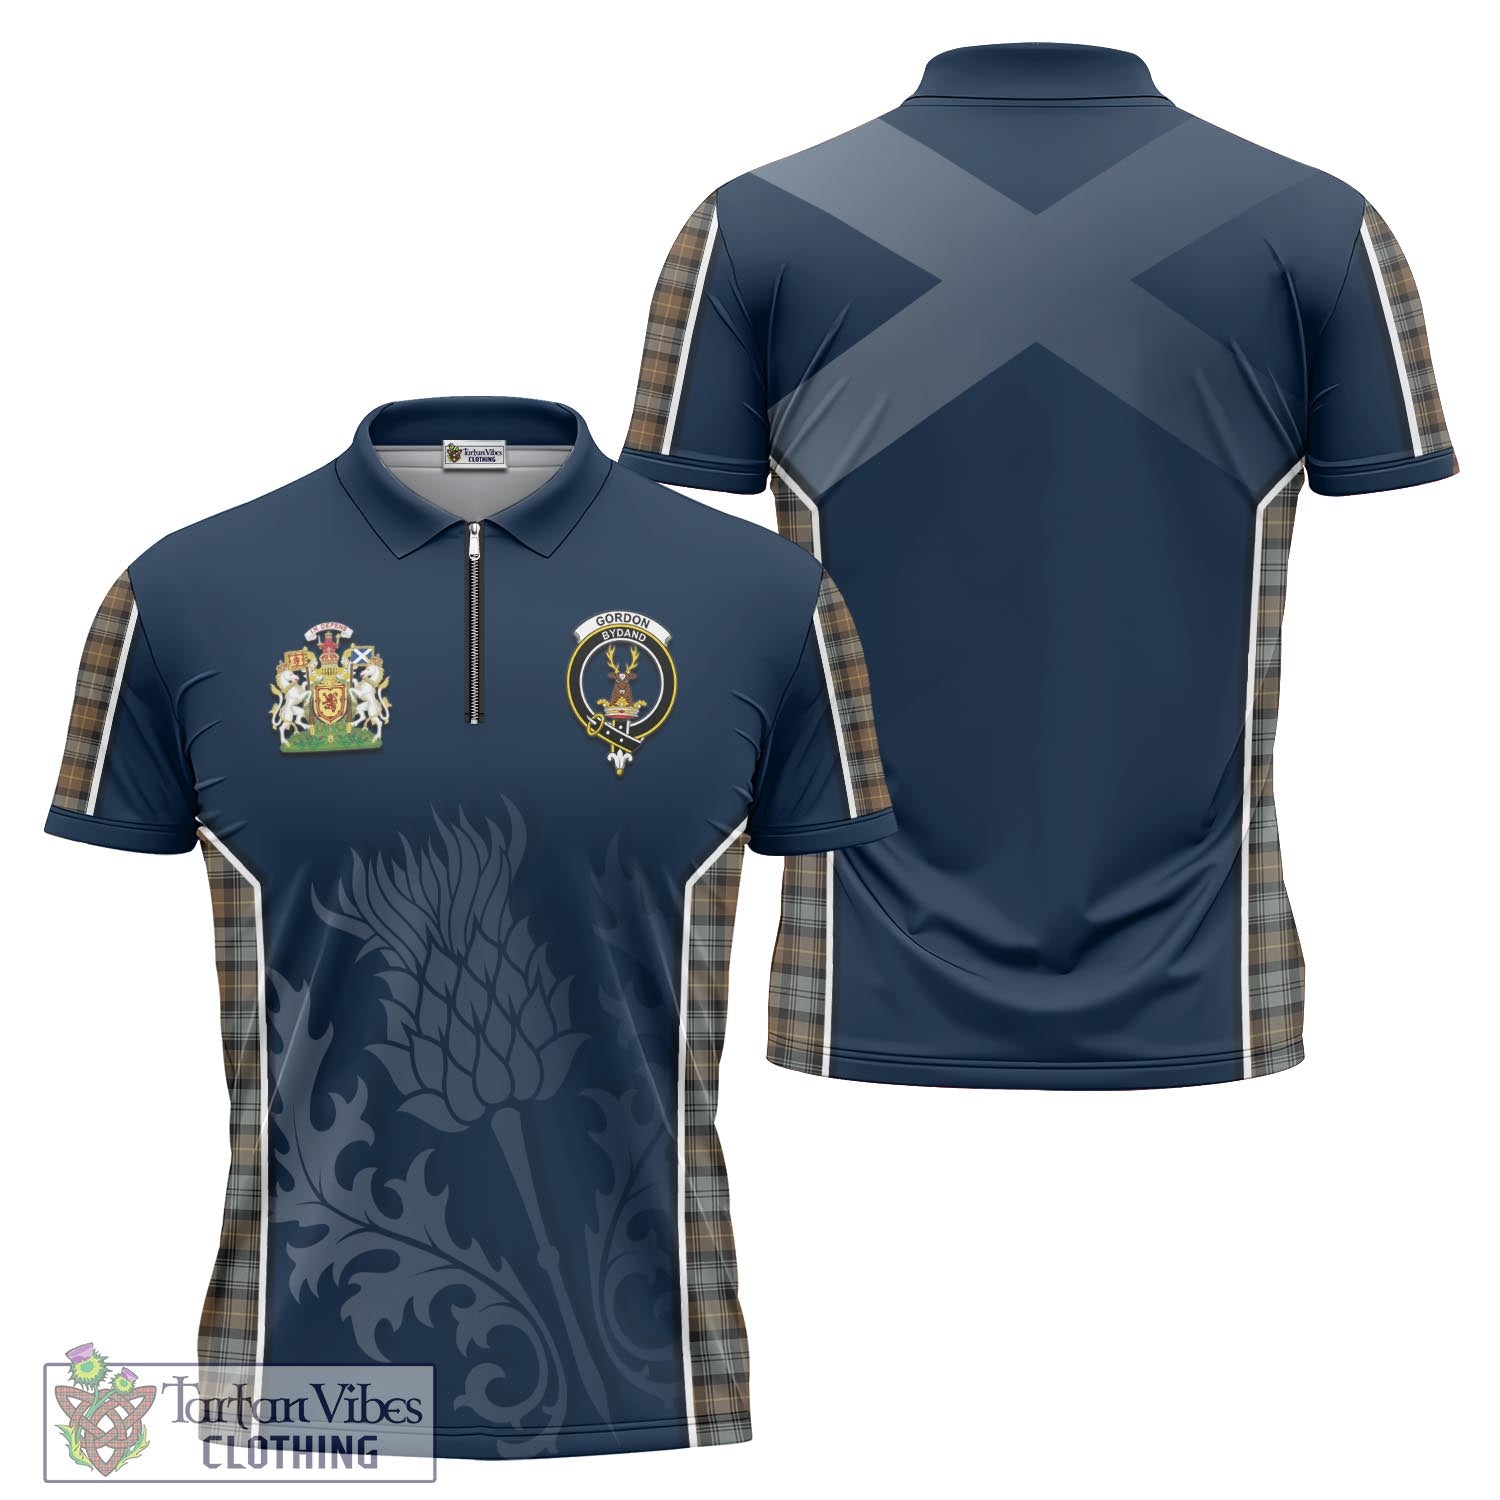 Tartan Vibes Clothing Gordon Weathered Tartan Zipper Polo Shirt with Family Crest and Scottish Thistle Vibes Sport Style